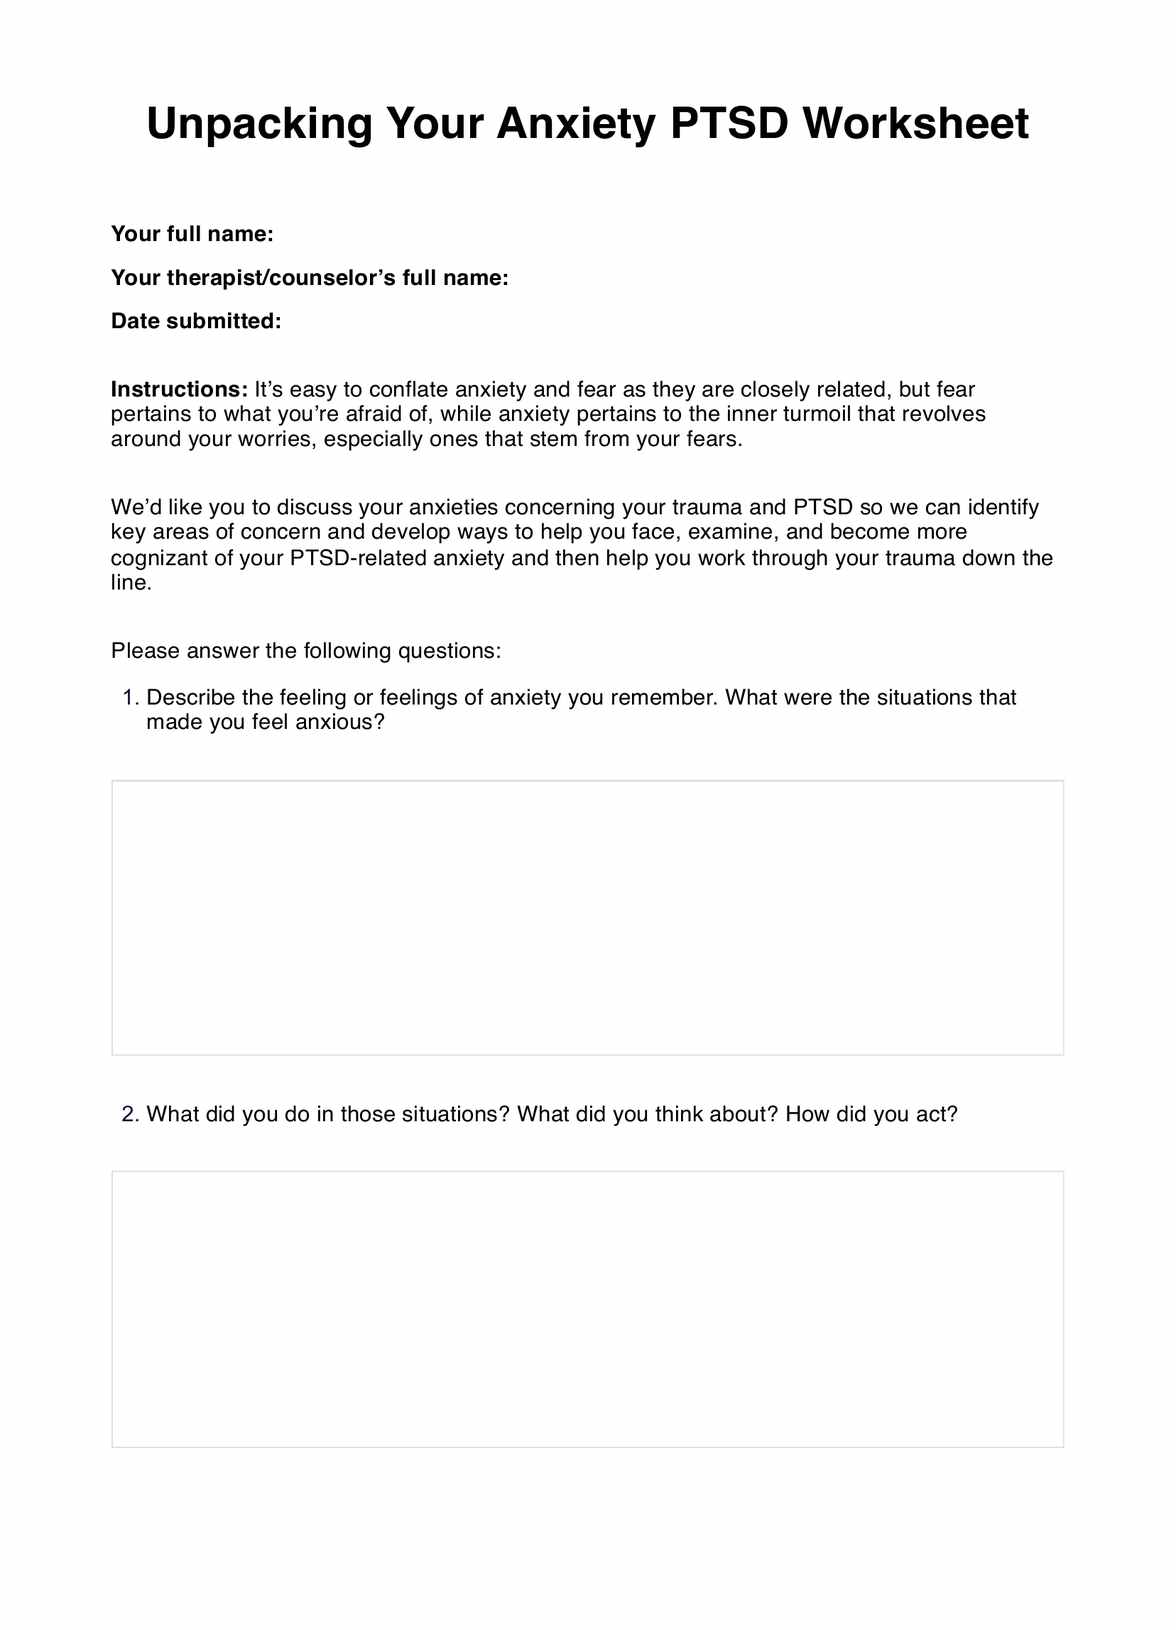 Unpacking Your Anxiety PTSD Worksheet PDF Example